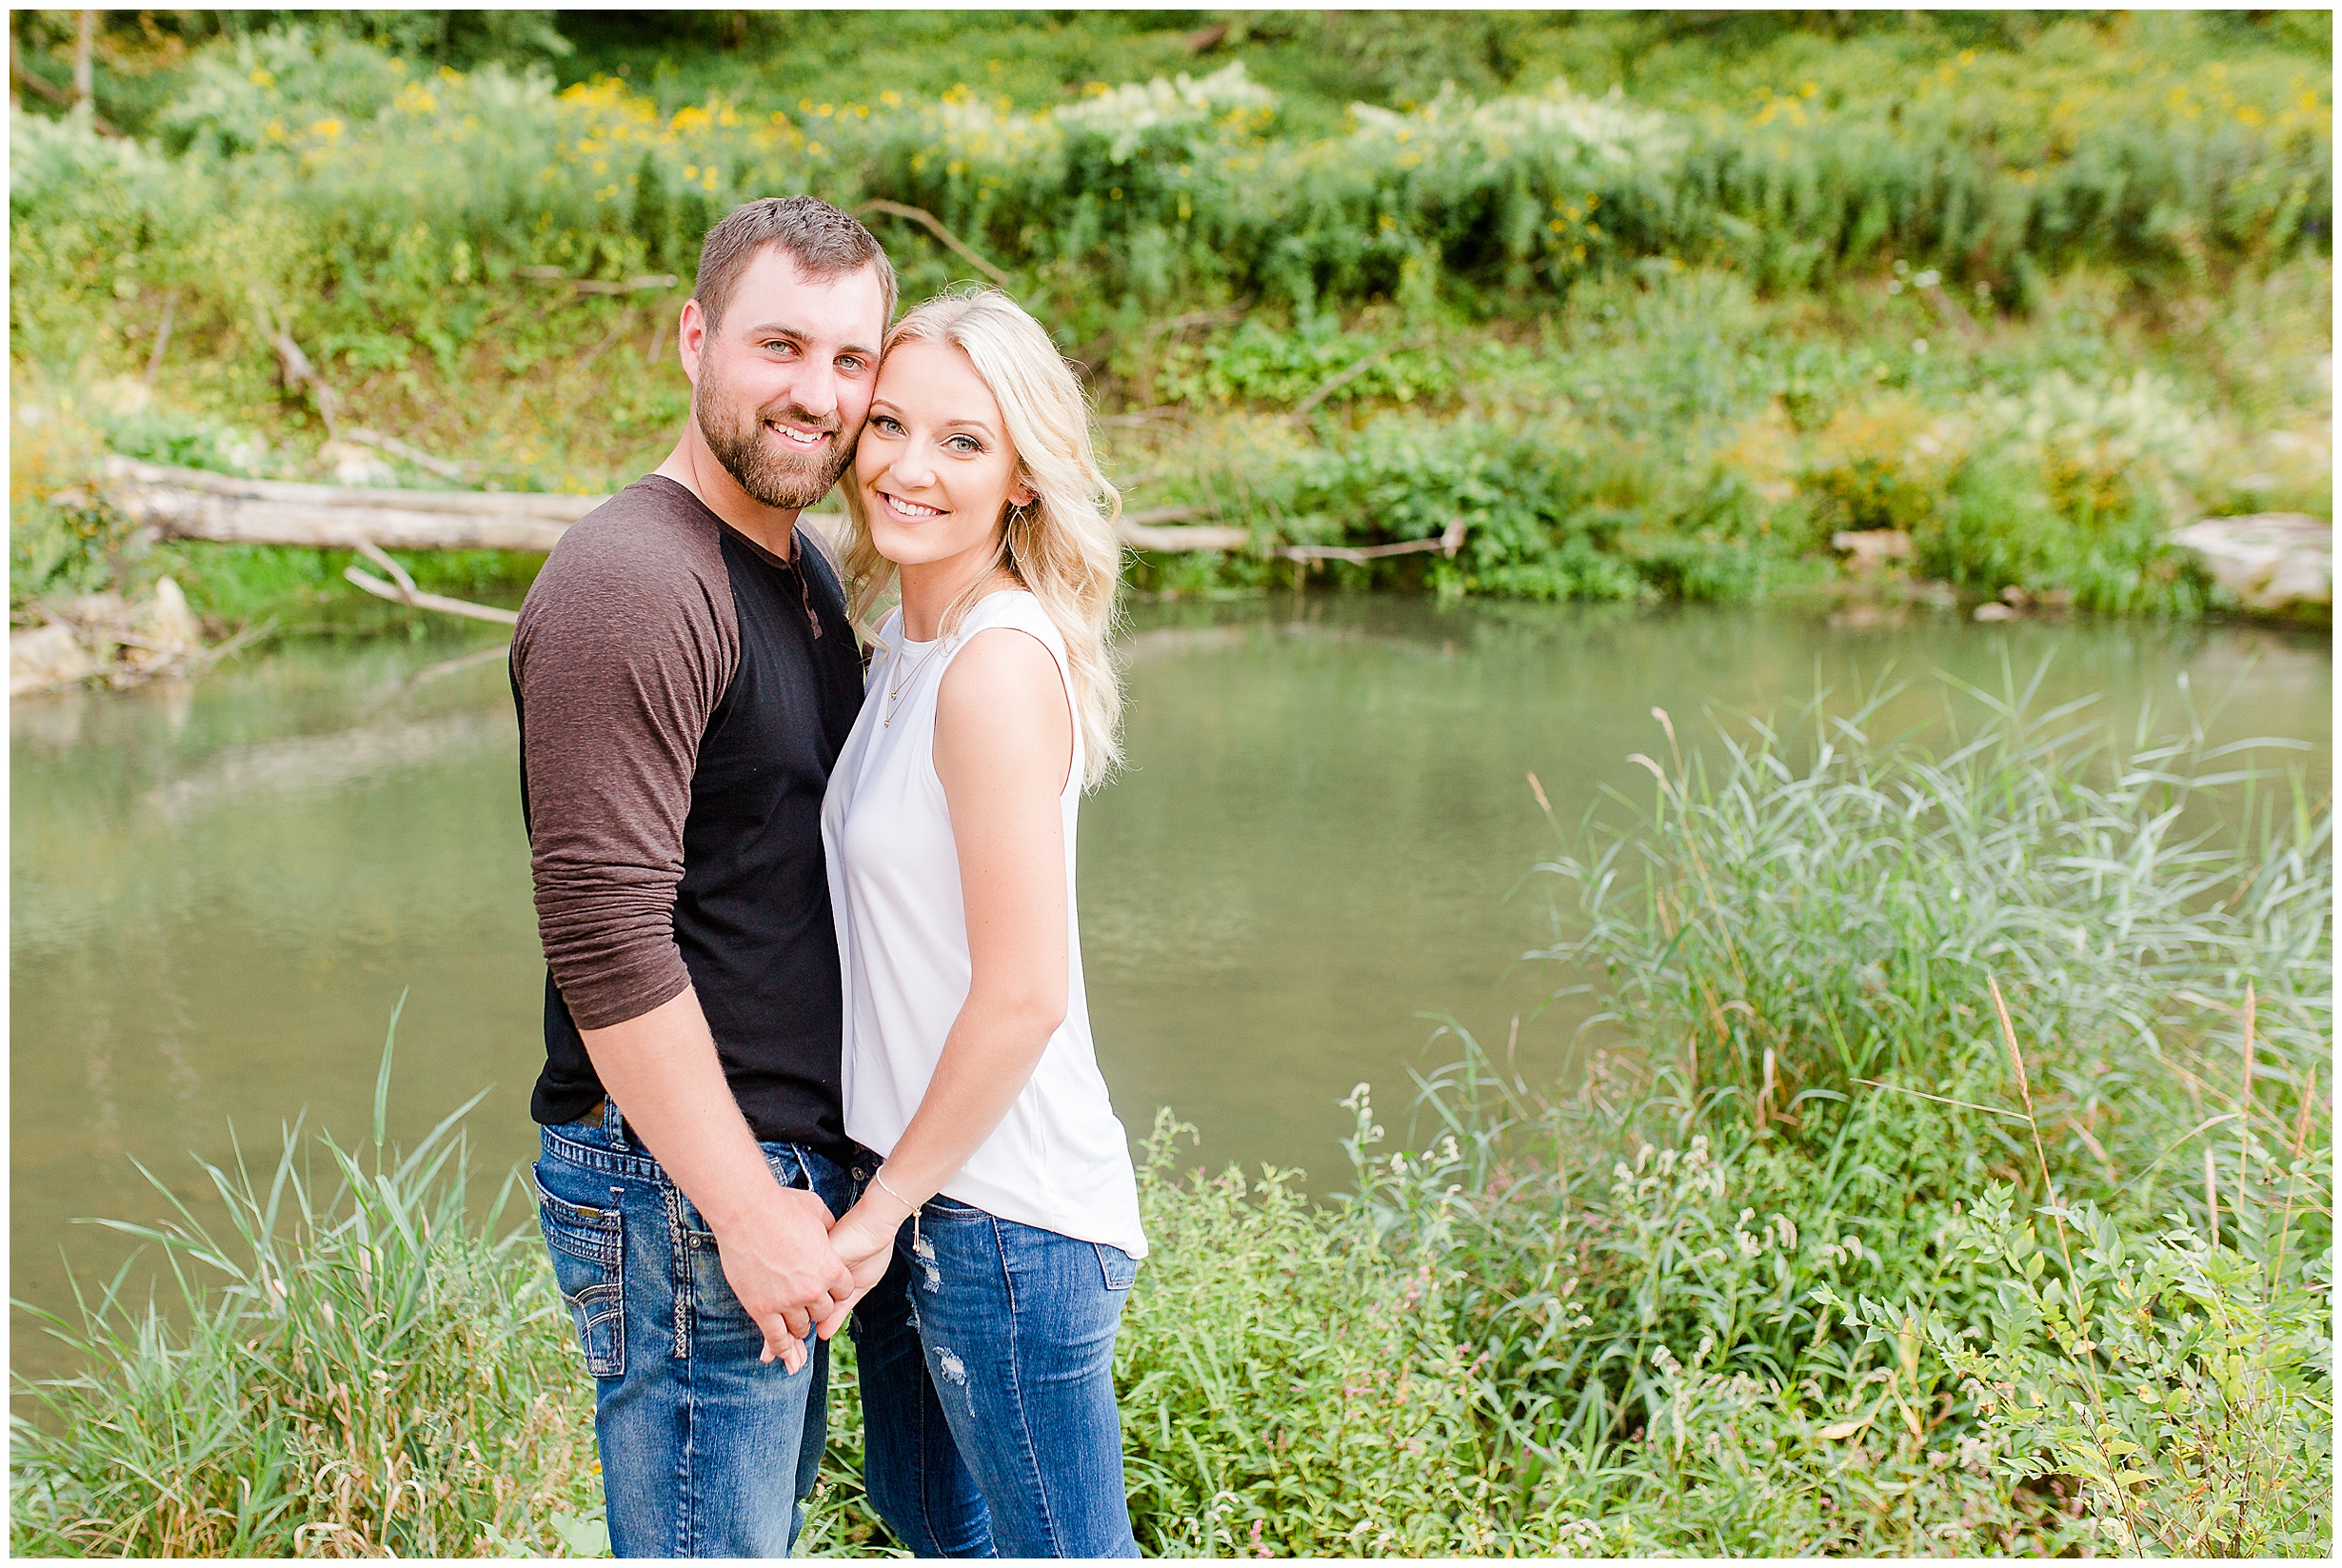 Yellow River Forest Engagement Session | Megan Snitker Photo-13.jpg